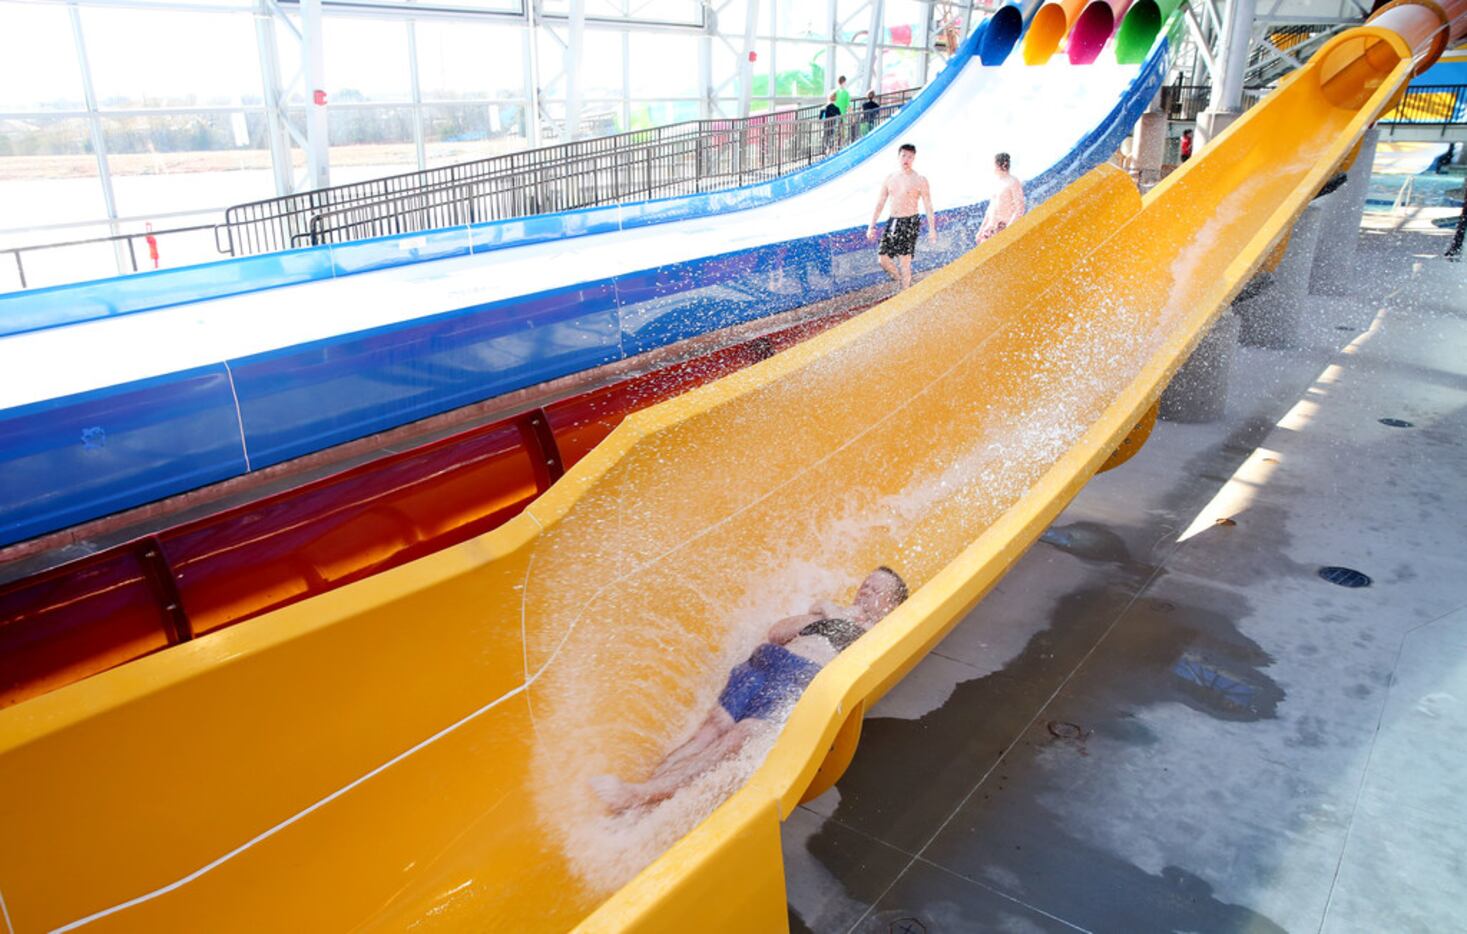 John Akin goes down a water slide during a media day at the new Epic Waters Indoor Waterpark...